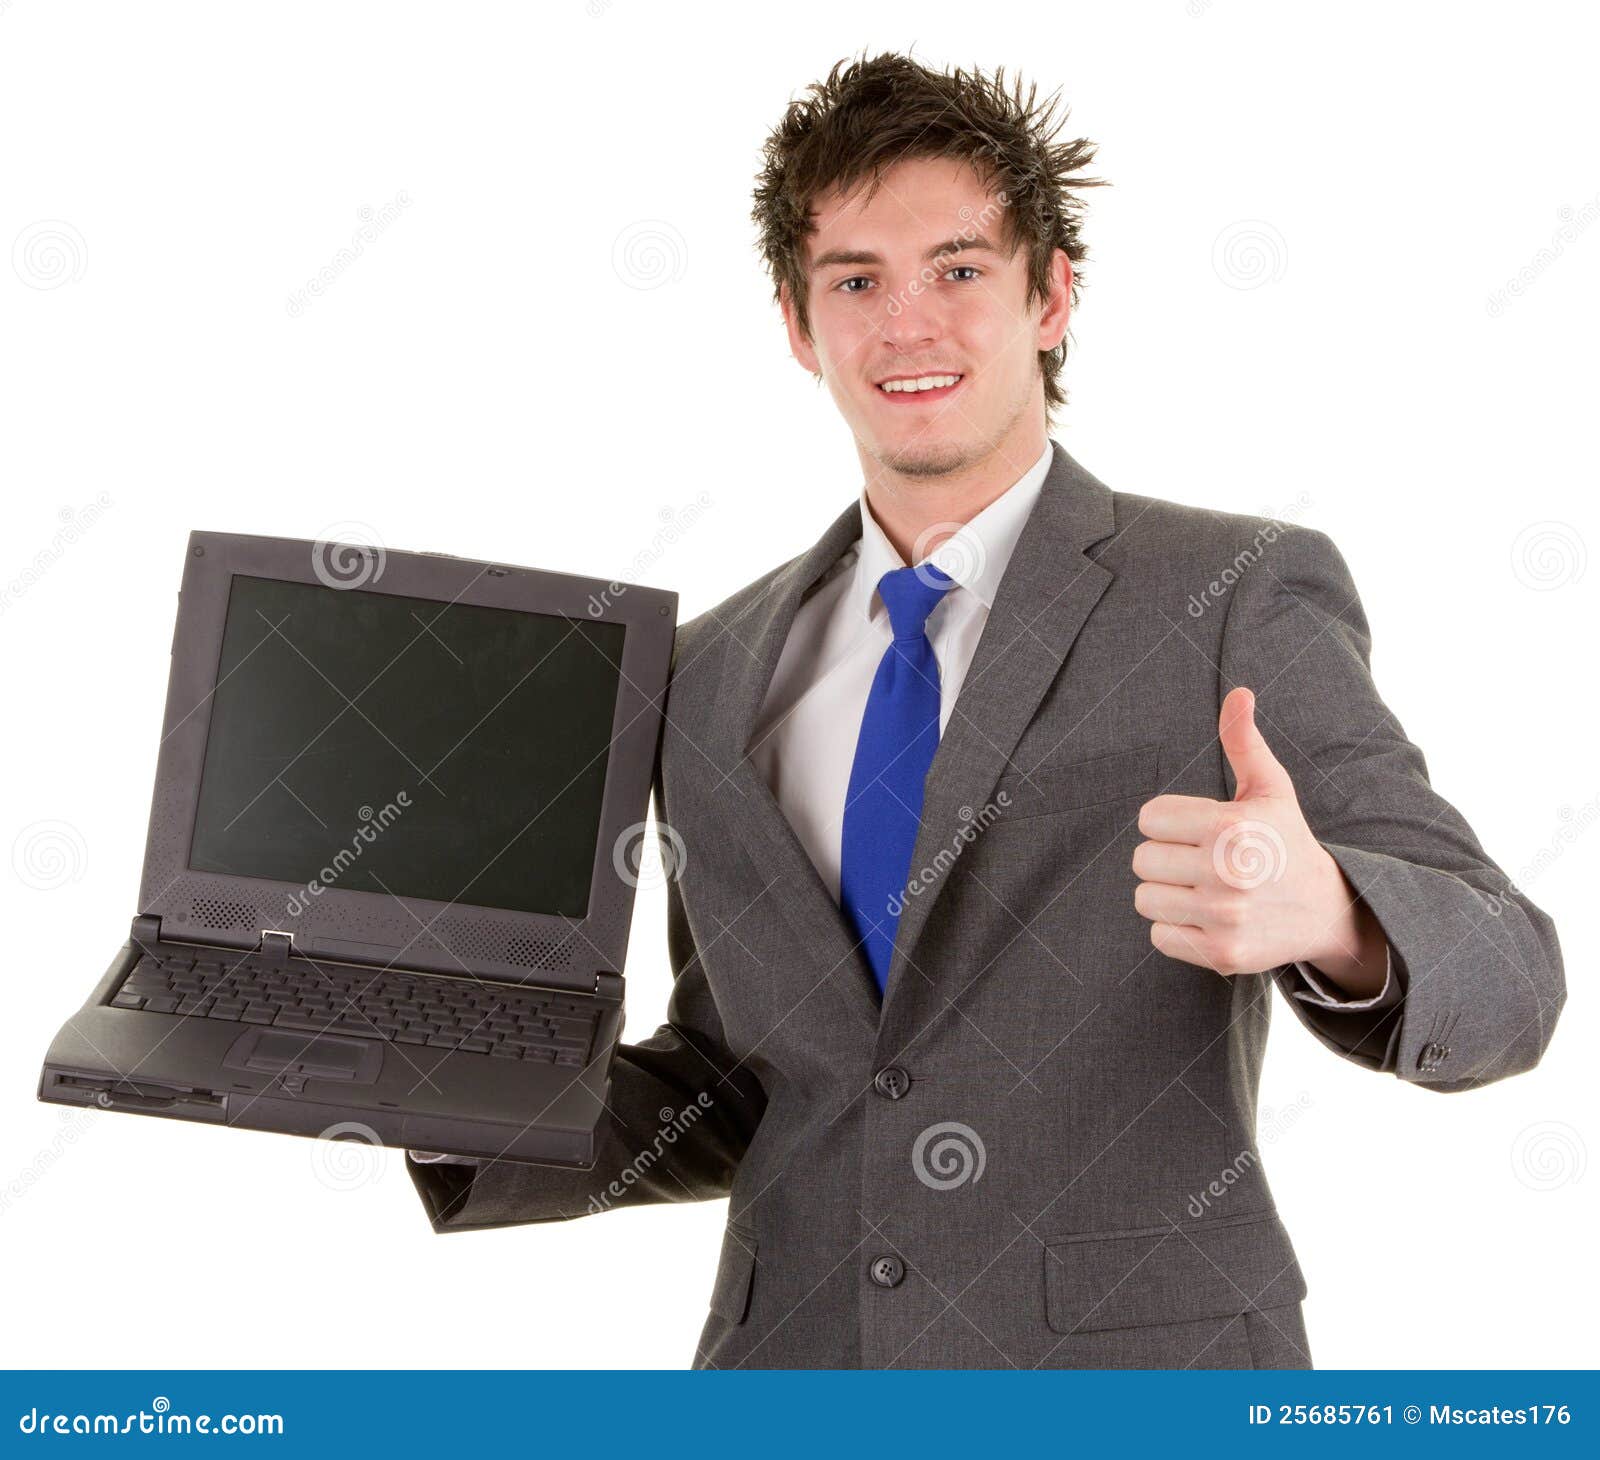 Businessman with a laptop. A business worker holding a laptop, showing a thumbs up sign, isolated on white